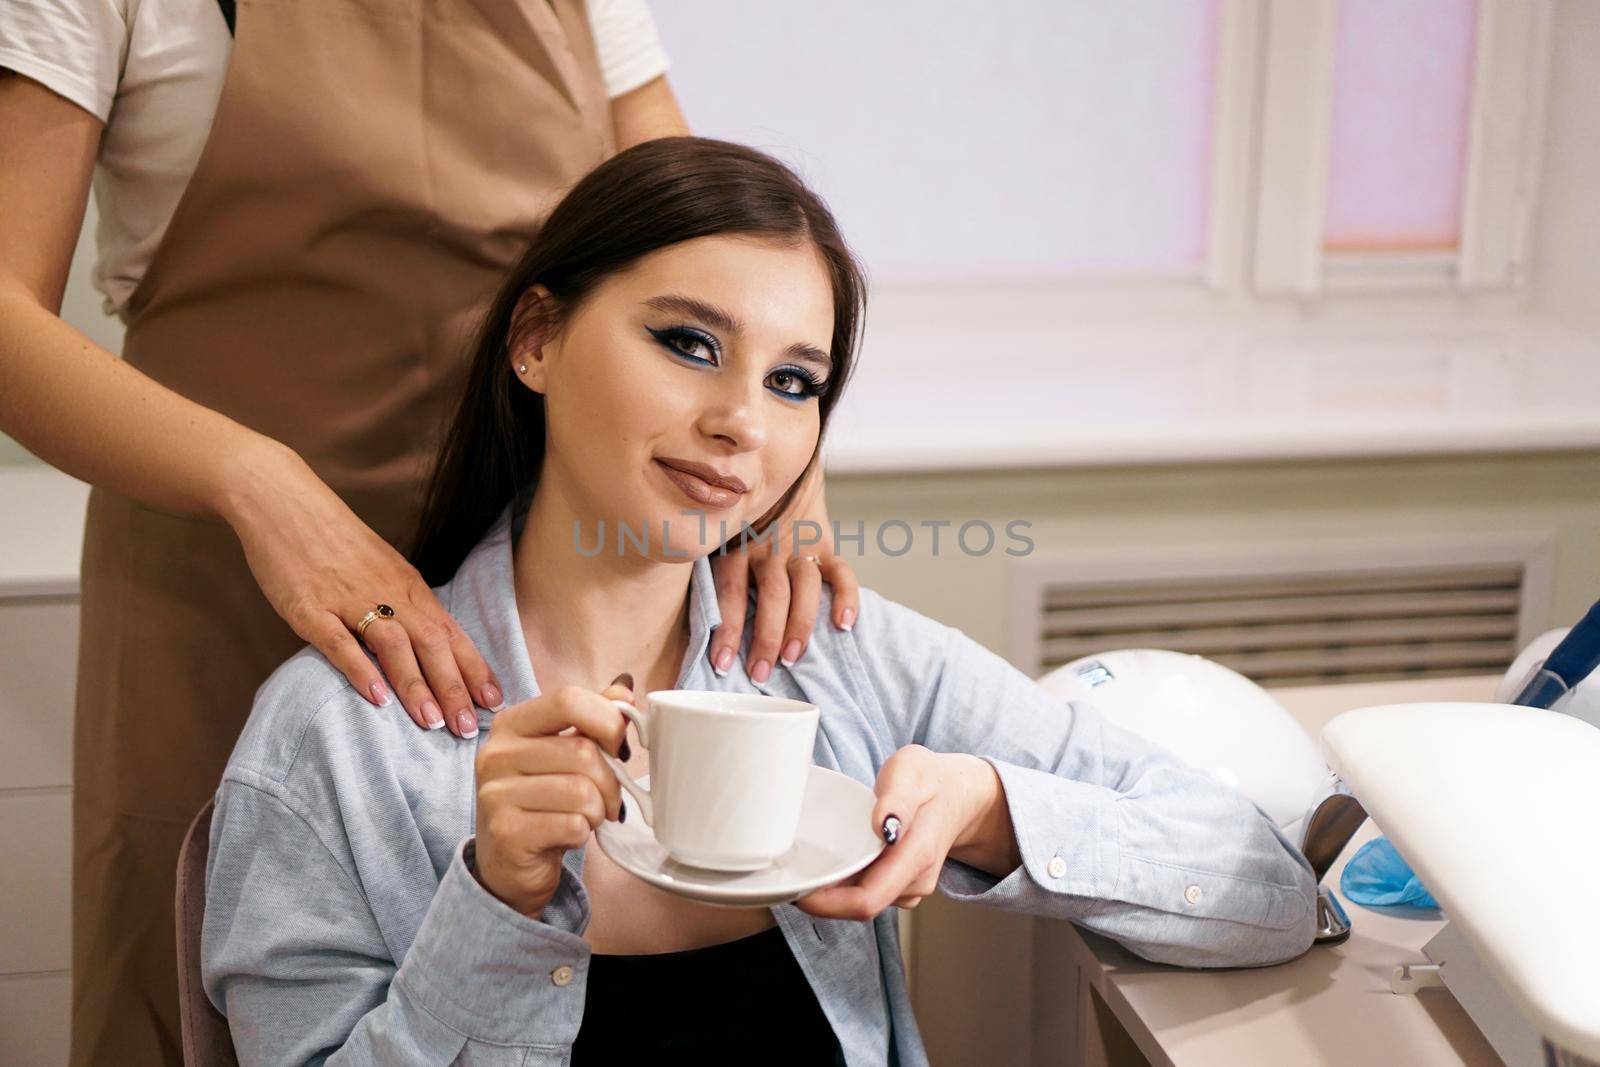 Beautiful woman getting manicure and massage at the same time in a beauty salon. She smiles and holds a cup of coffee. VIP client in a beauty salon